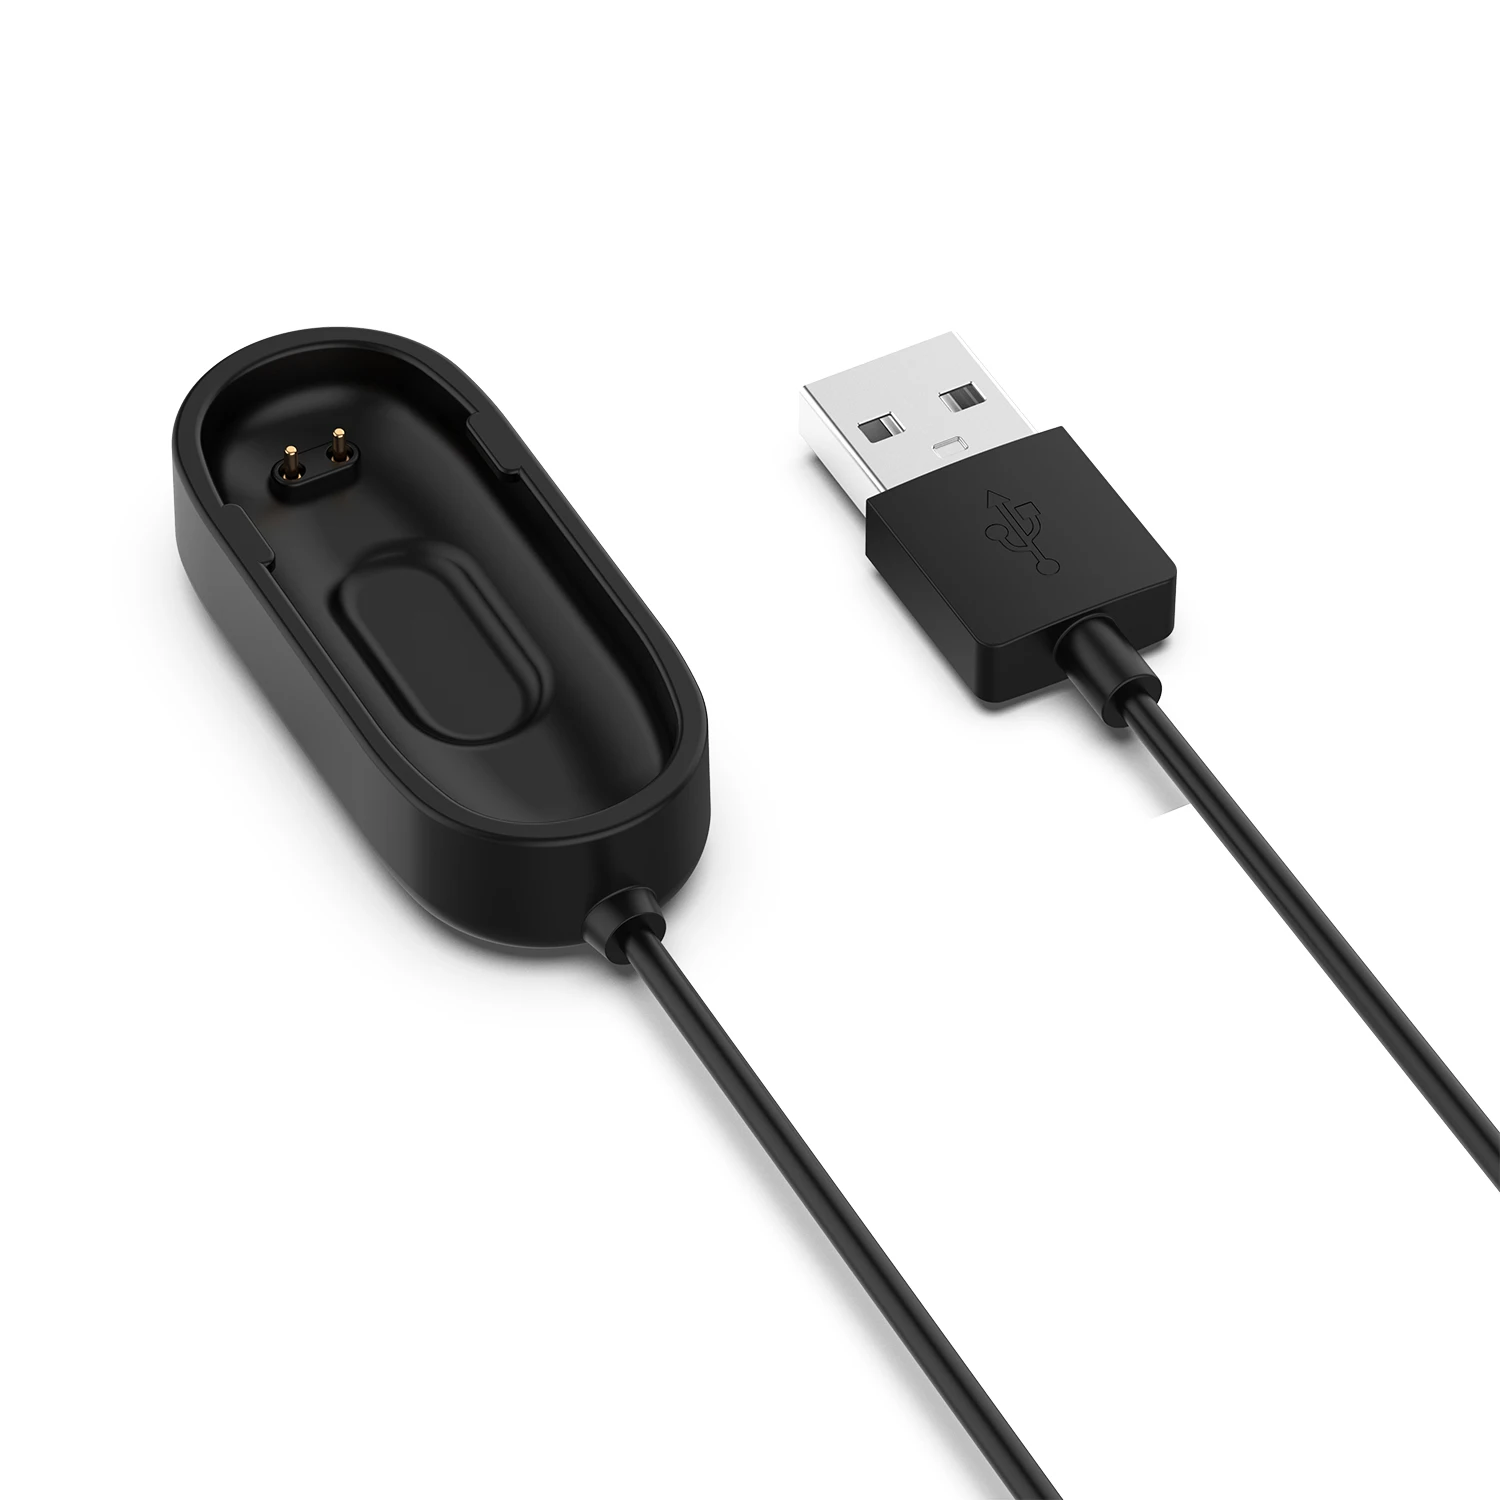 USB Cord Cable Adapter Power Fit Charger Fast Charging For Mi Band 4 Smart Bracelet